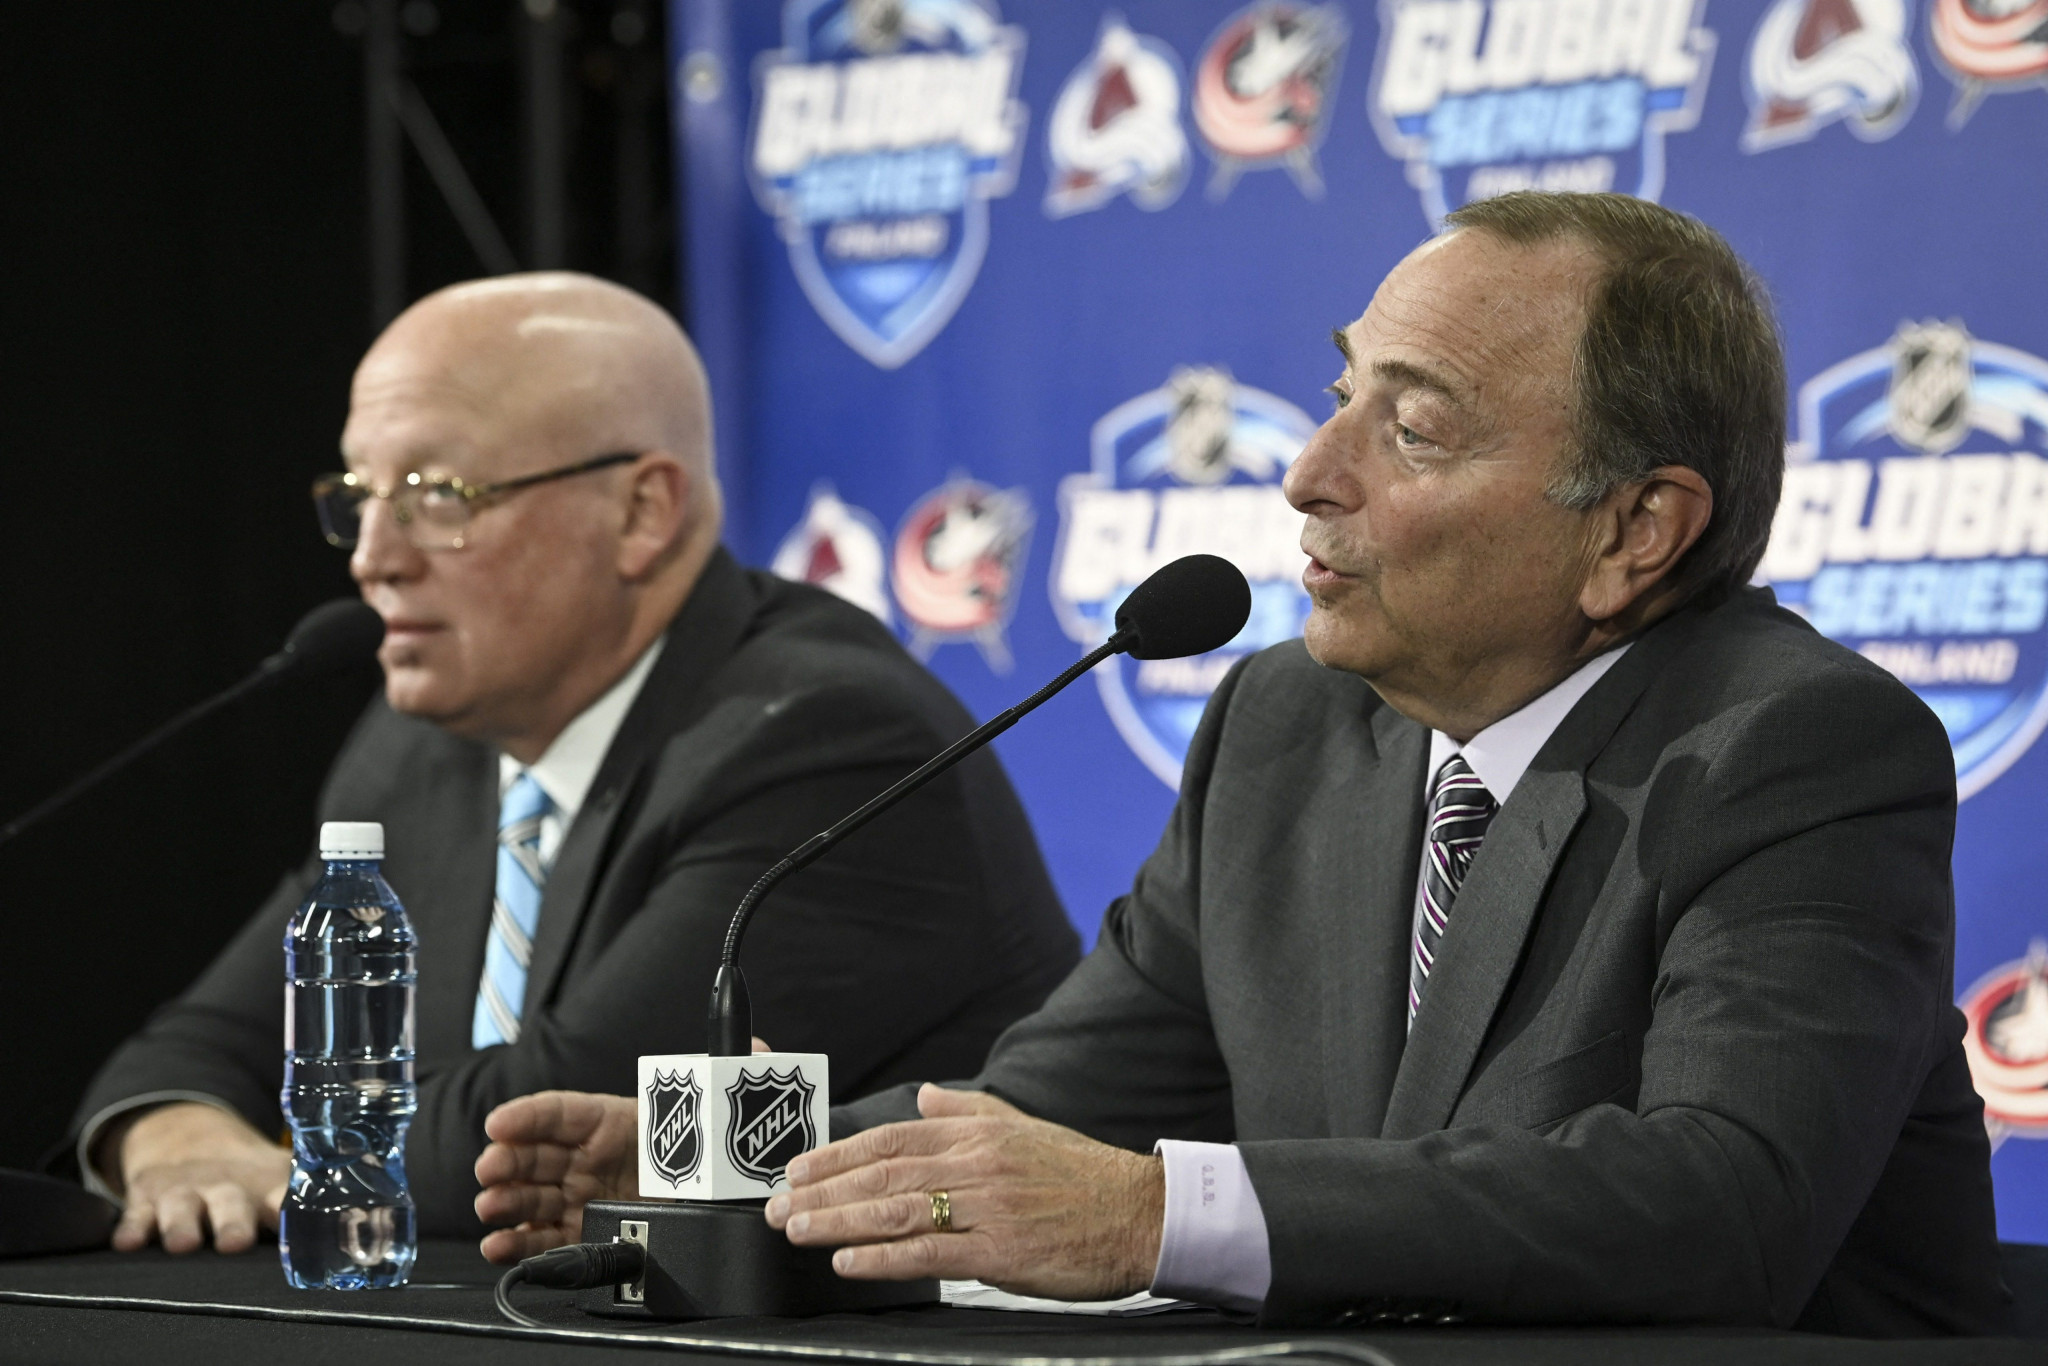 National Hockey League commissioner Gary Bettman, right, and deputy commissioner Bill Daly, left, held a meeting with International Ice Hockey Federation President Luc Tardif ©Getty Images